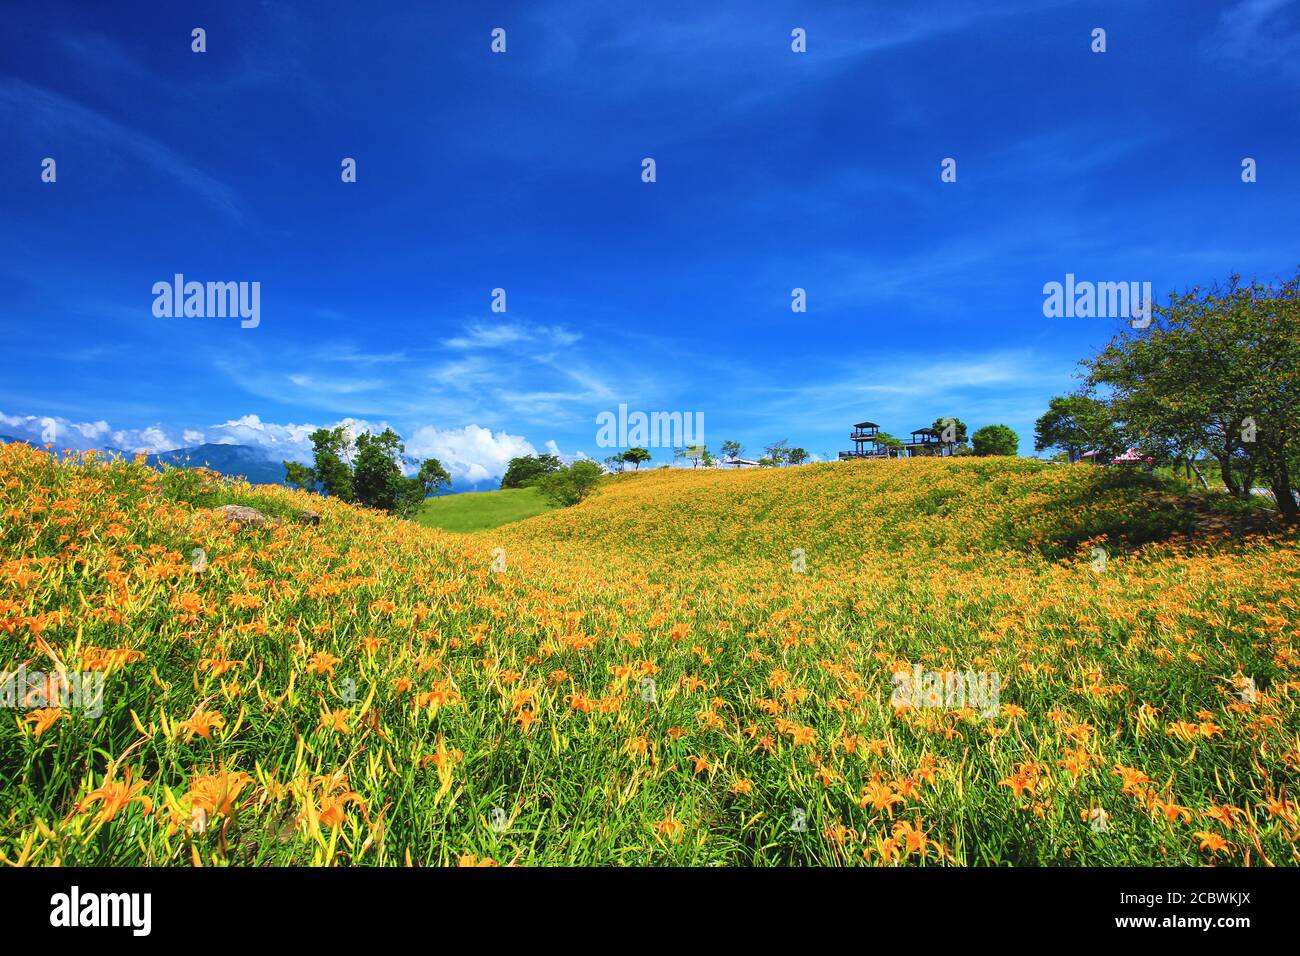 Beautiful scenery of daylily flowers with viewing platform in a sunny day Stock Photo